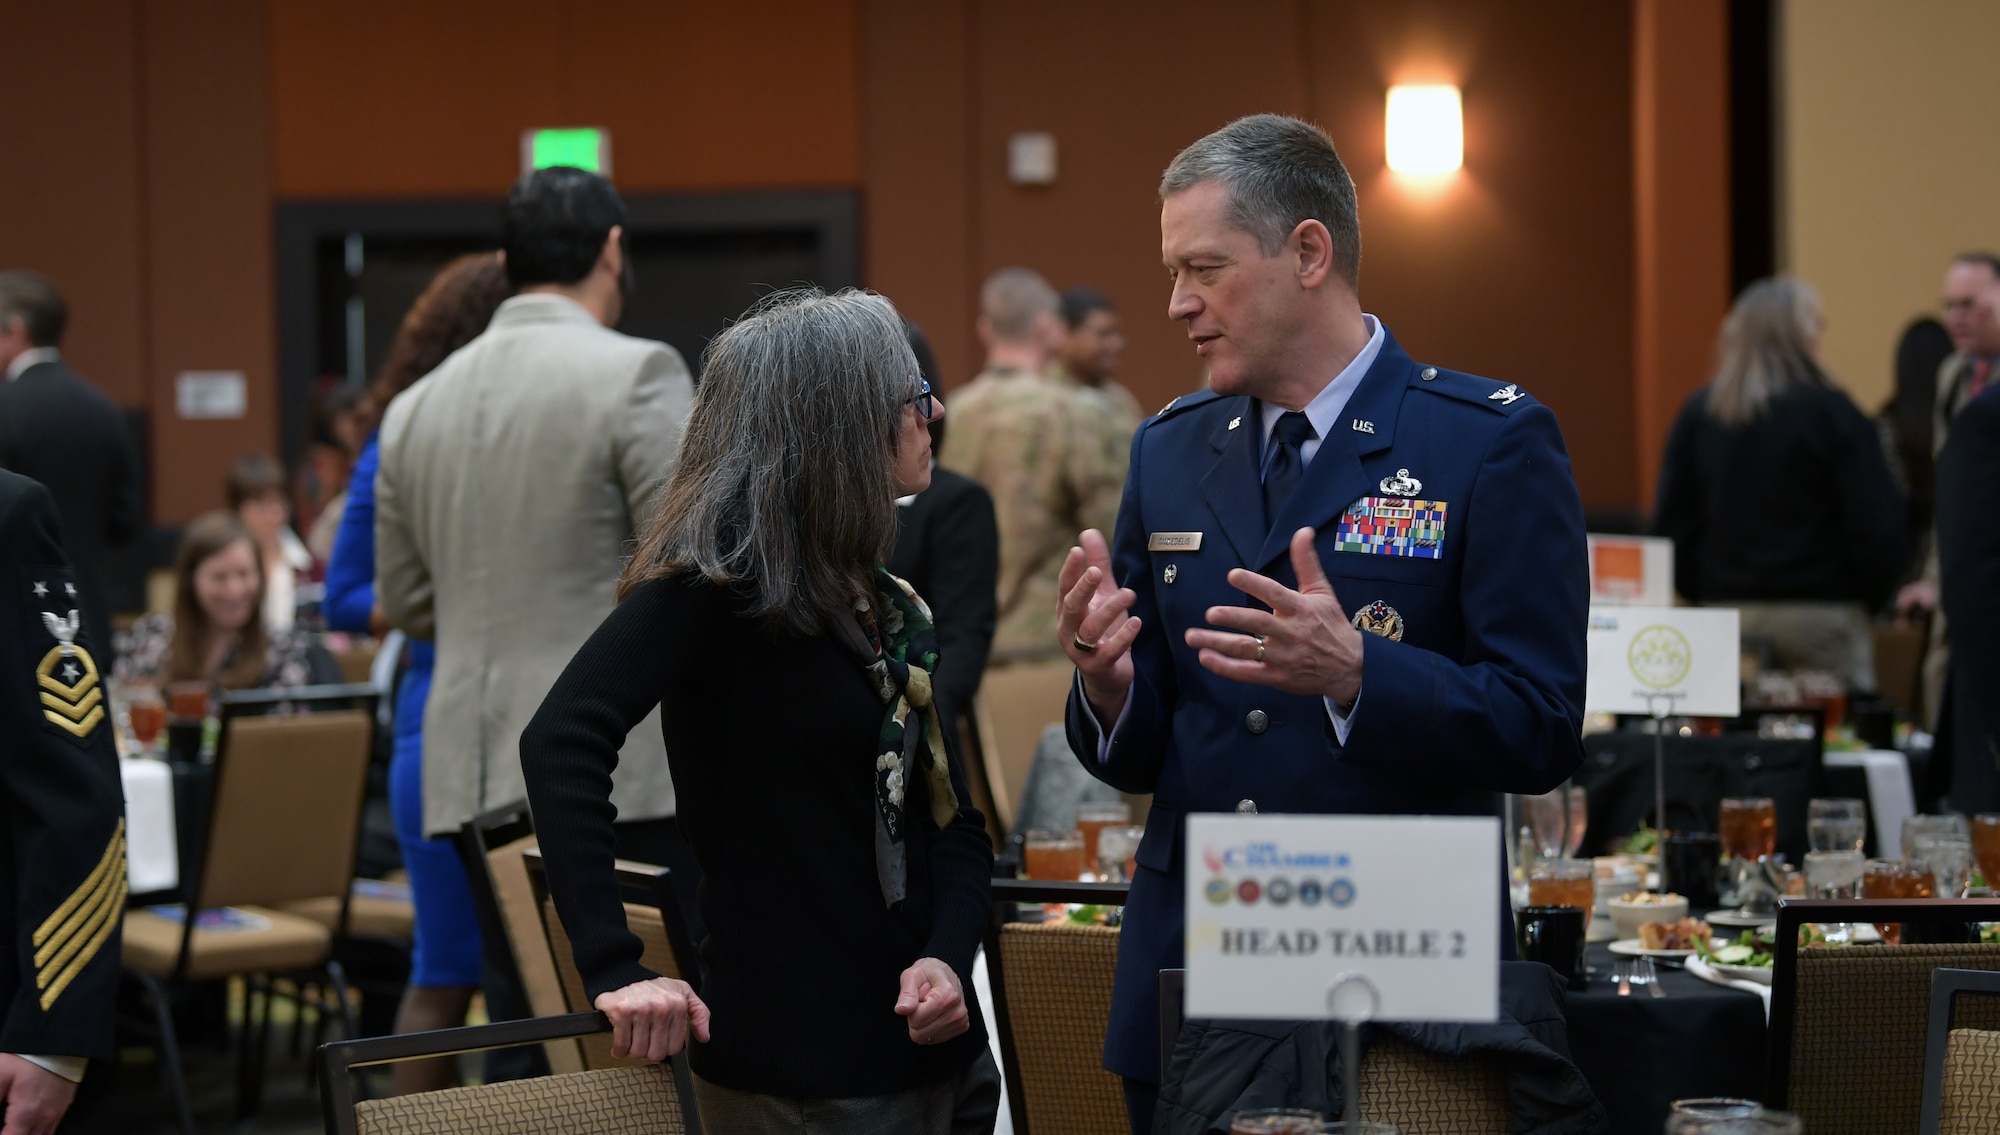 Col. Aras Suziedelis, National Security Agency-Colorado deputy director, speaks with Andrea Grayson, an event attendee, during the annual State of the Base luncheon at the Radisson Hotel in Aurora, Co., Jan. 22, 2020.